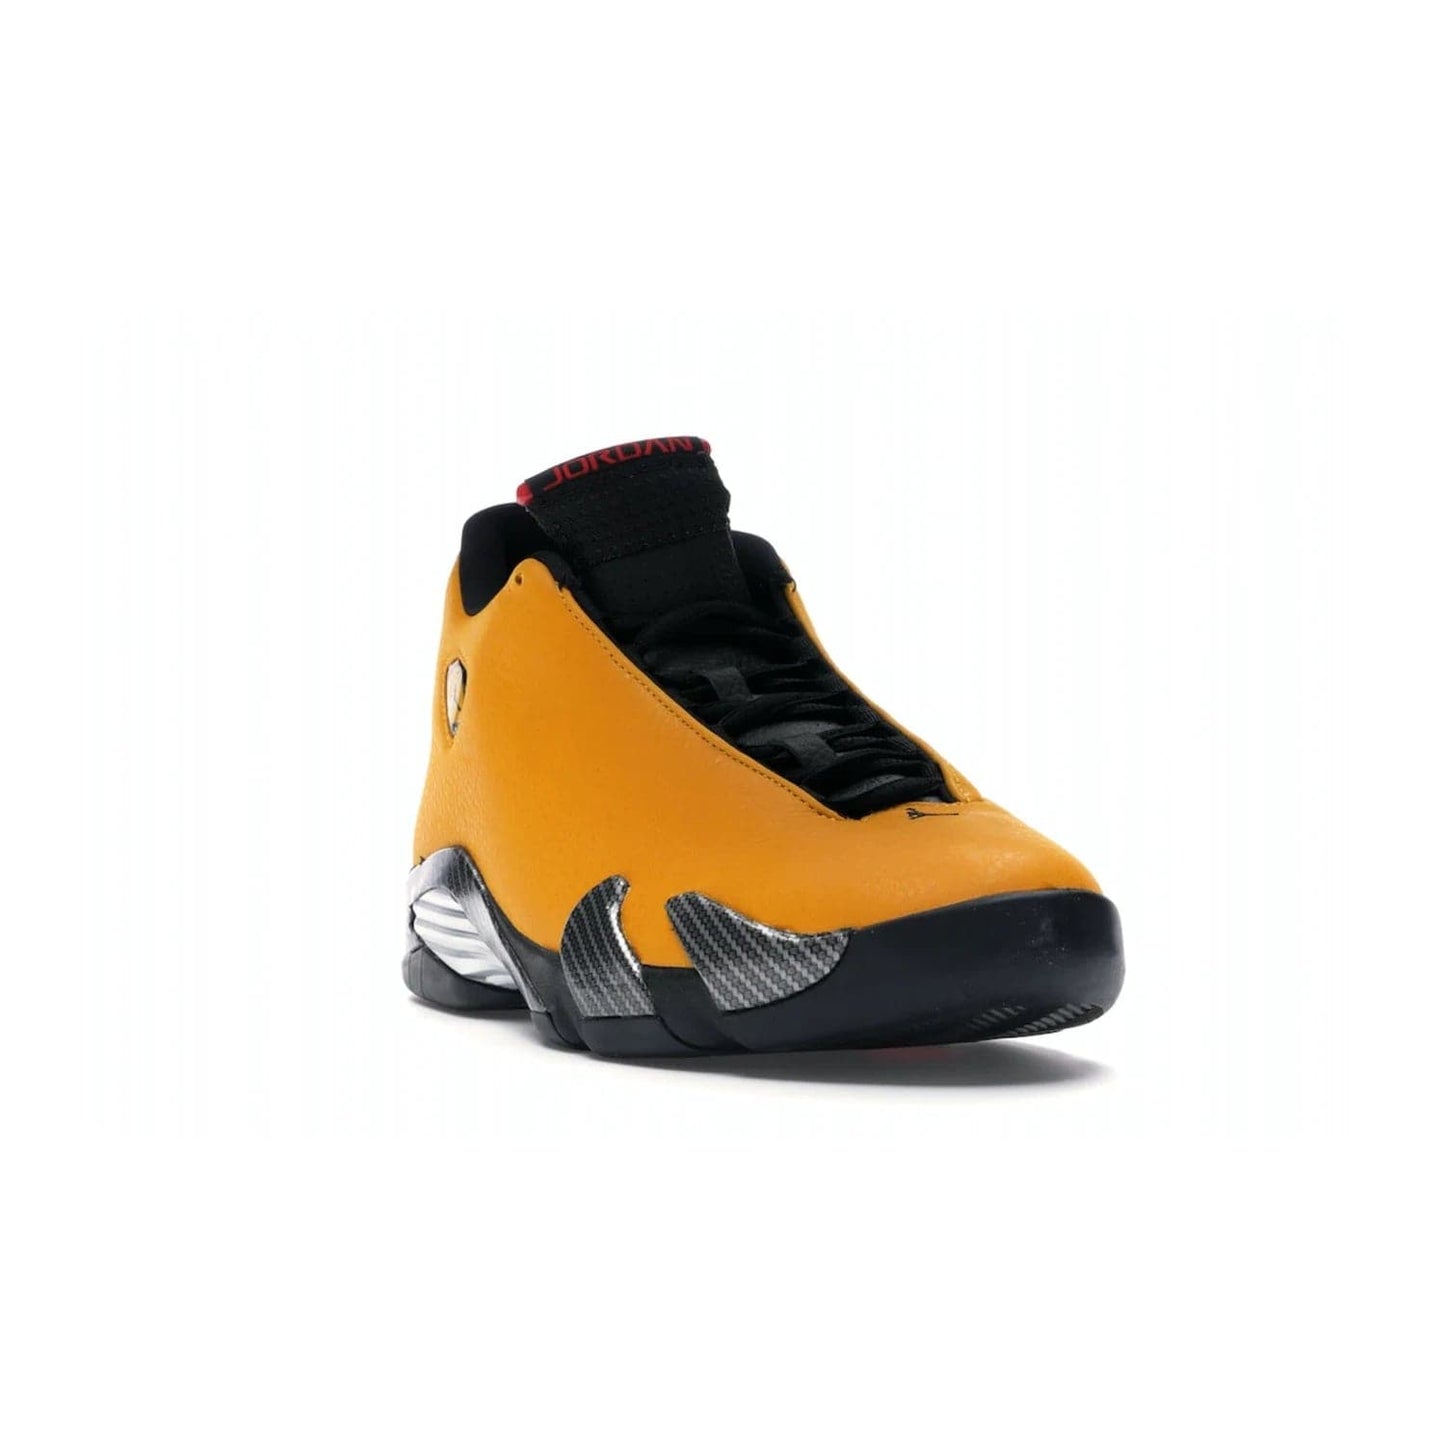 Jordan 14 Retro University Gold - Image 7 - Only at www.BallersClubKickz.com - Air Jordan 14 Retro University Gold: High-quality leather sneaker with Jumpman, tongue & heel logos. Zoom Air units & herringbone traction for superior comfort. University Gold outsole for stylish streetwear.